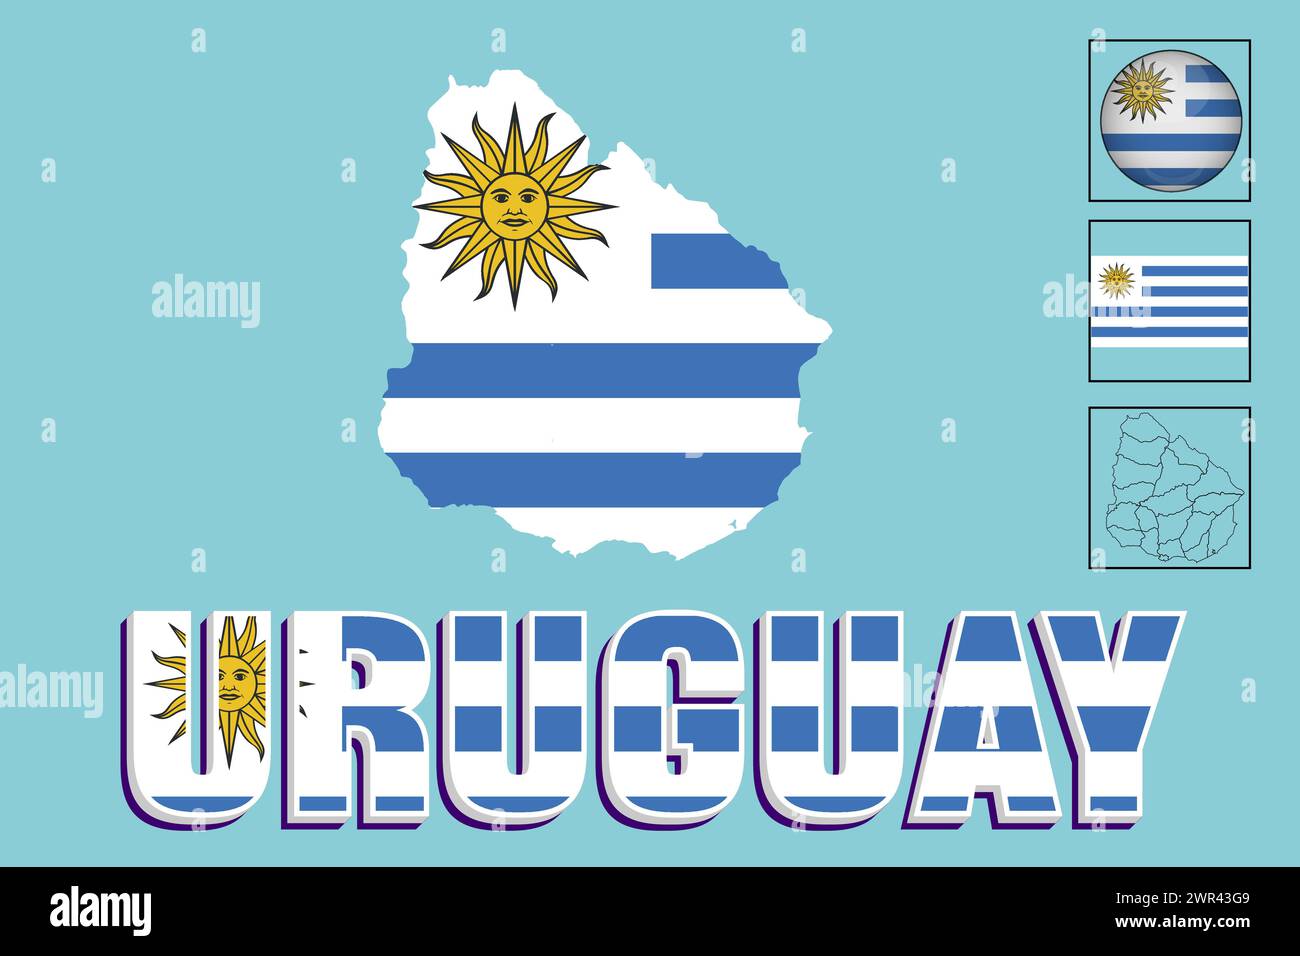 Uruguay flag and map in vector illustration Stock Vector